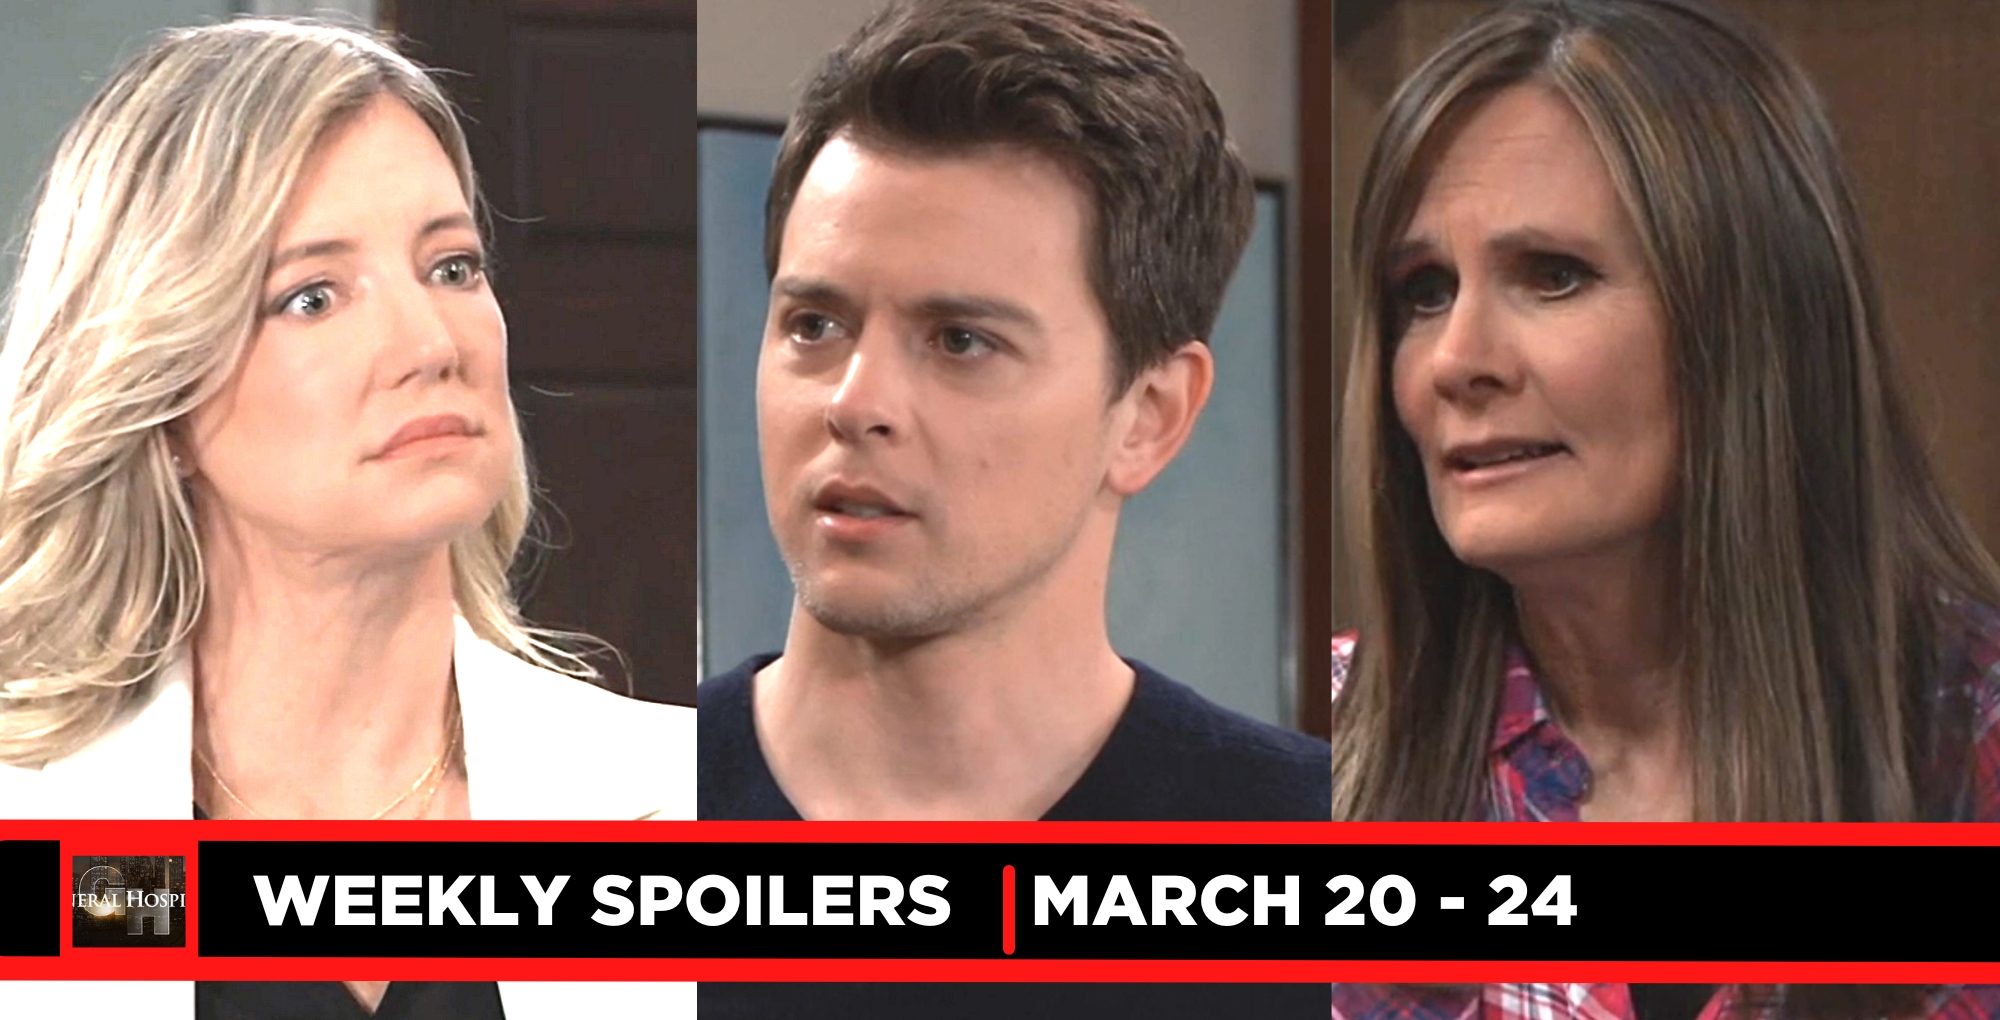 general hospital spoilers for march 20 – march 24, 2023, three images nina, michael, and lucy